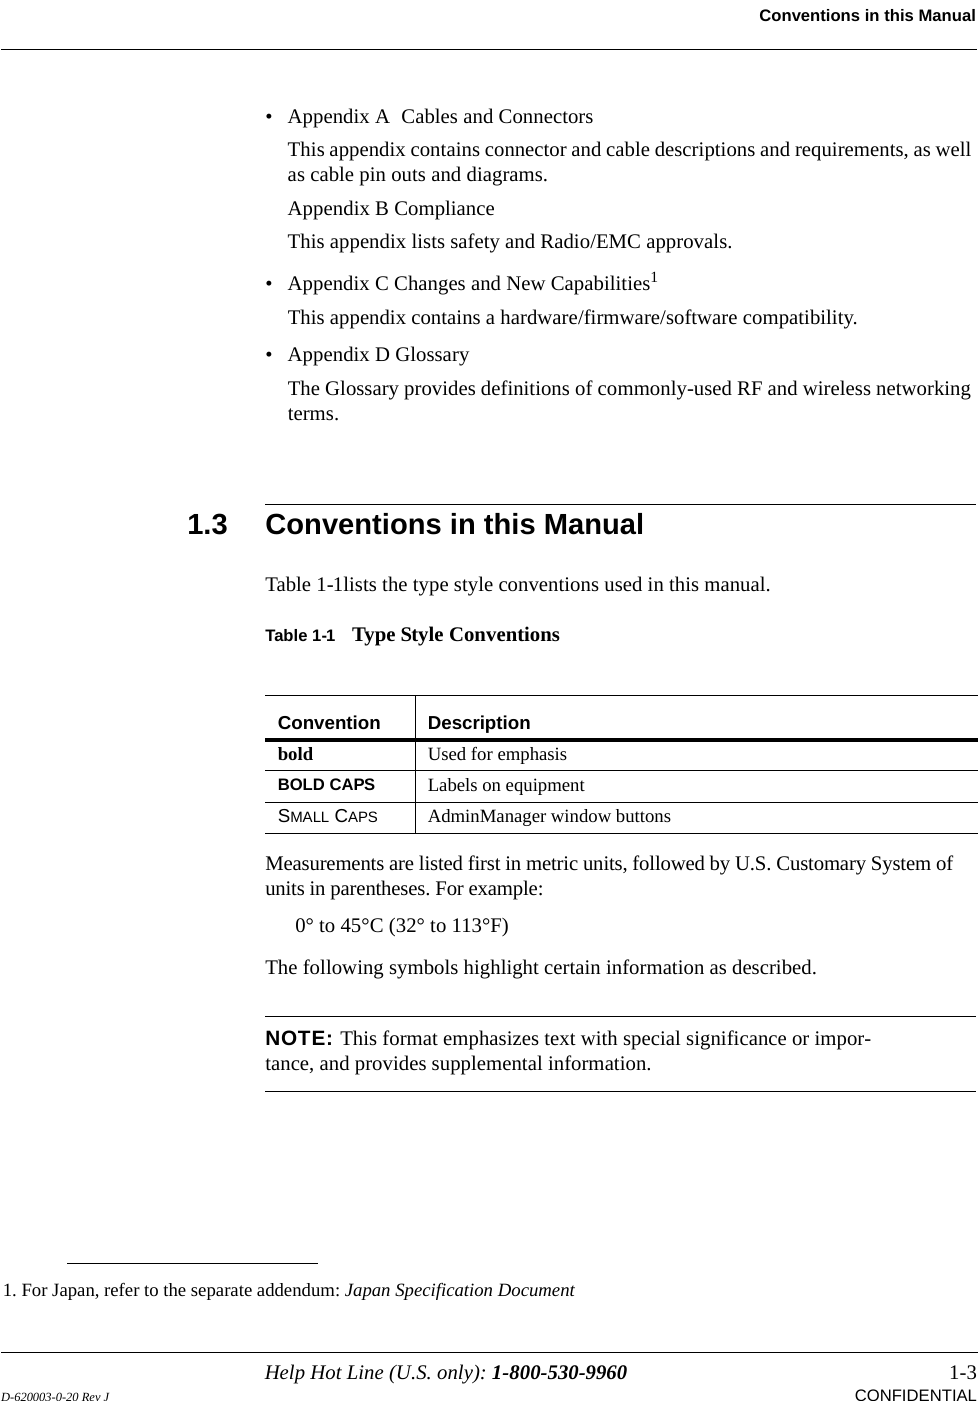 Help Hot Line (U.S. only): 1-800-530-9960 1-3D-620003-0-20 Rev J CONFIDENTIALConventions in this Manual• Appendix A  Cables and ConnectorsThis appendix contains connector and cable descriptions and requirements, as well as cable pin outs and diagrams.Appendix B ComplianceThis appendix lists safety and Radio/EMC approvals.• Appendix C Changes and New Capabilities1This appendix contains a hardware/firmware/software compatibility.• Appendix D GlossaryThe Glossary provides definitions of commonly-used RF and wireless networking terms.1.3 Conventions in this ManualTable 1-1lists the type style conventions used in this manual.Table 1-1 Type Style ConventionsMeasurements are listed first in metric units, followed by U.S. Customary System of units in parentheses. For example:0° to 45°C (32° to 113°F)The following symbols highlight certain information as described.NOTE: This format emphasizes text with special significance or impor-tance, and provides supplemental information.1. For Japan, refer to the separate addendum: Japan Specification DocumentConvention Descriptionbold Used for emphasisBOLD CAPS Labels on equipmentSMALL CAPS AdminManager window buttons